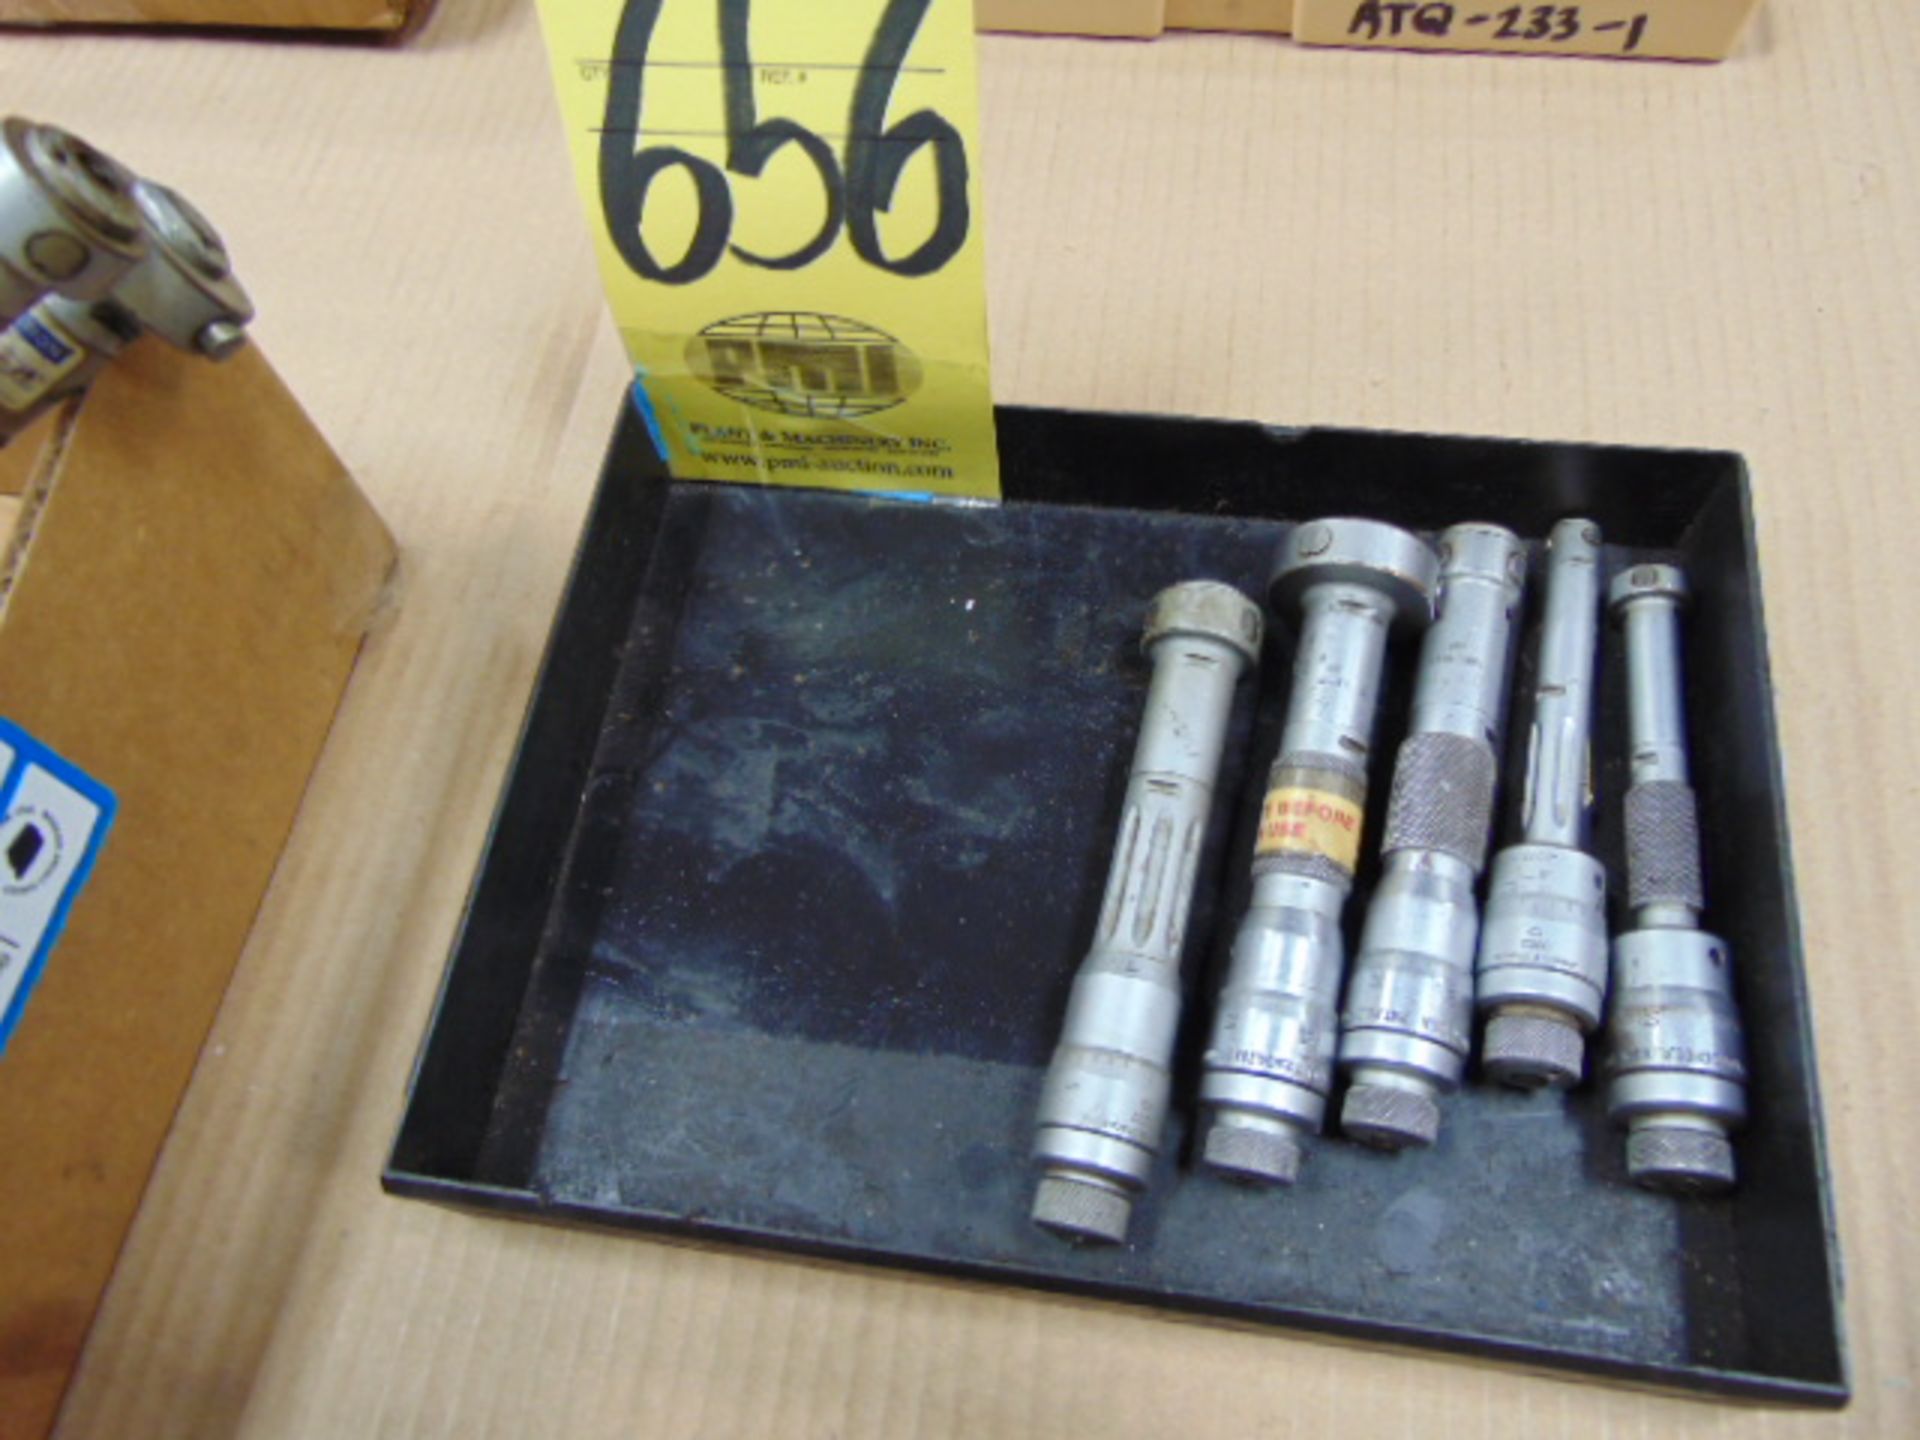 LOT OF HOLE MICROMETERS (5), (in one box)